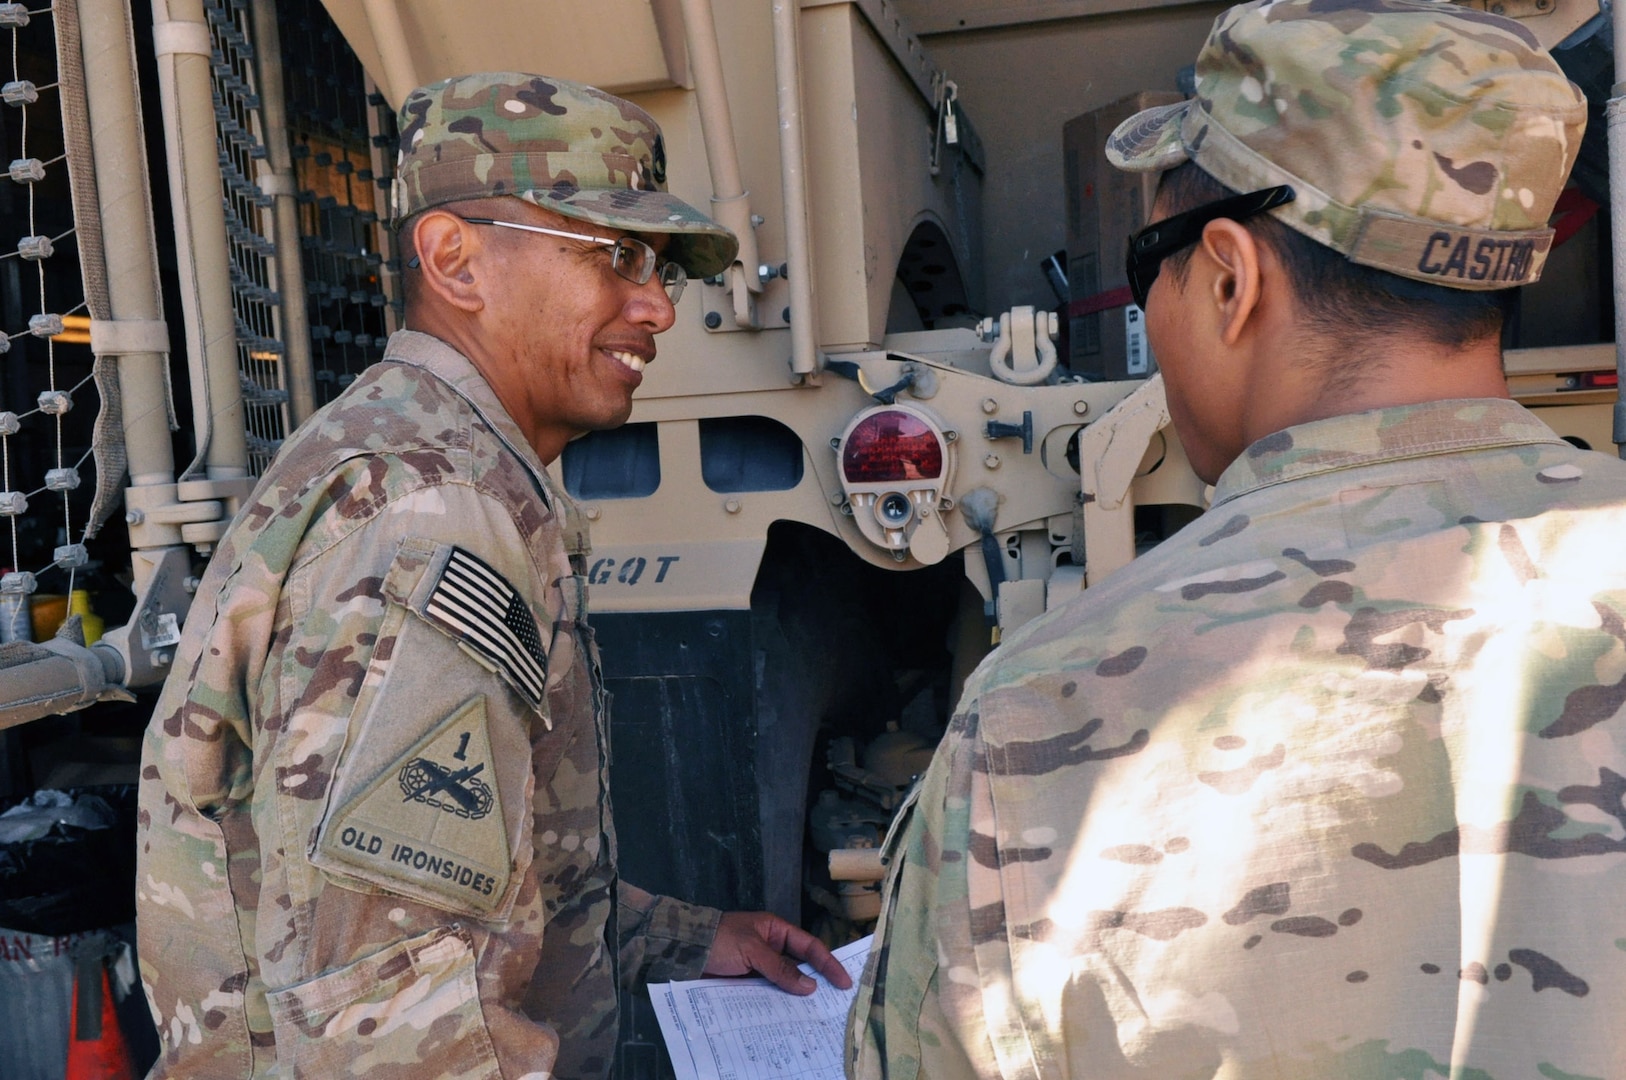 Sgt. 1st Class Patrick J. Flores Sr., left, the platoon sergeant for Echo Company, 1st Battalion, 249th Infantry Regiment, Task Force Guam, discusses maintenance issues with his soldiers at Camp Phoenix in Kabul.